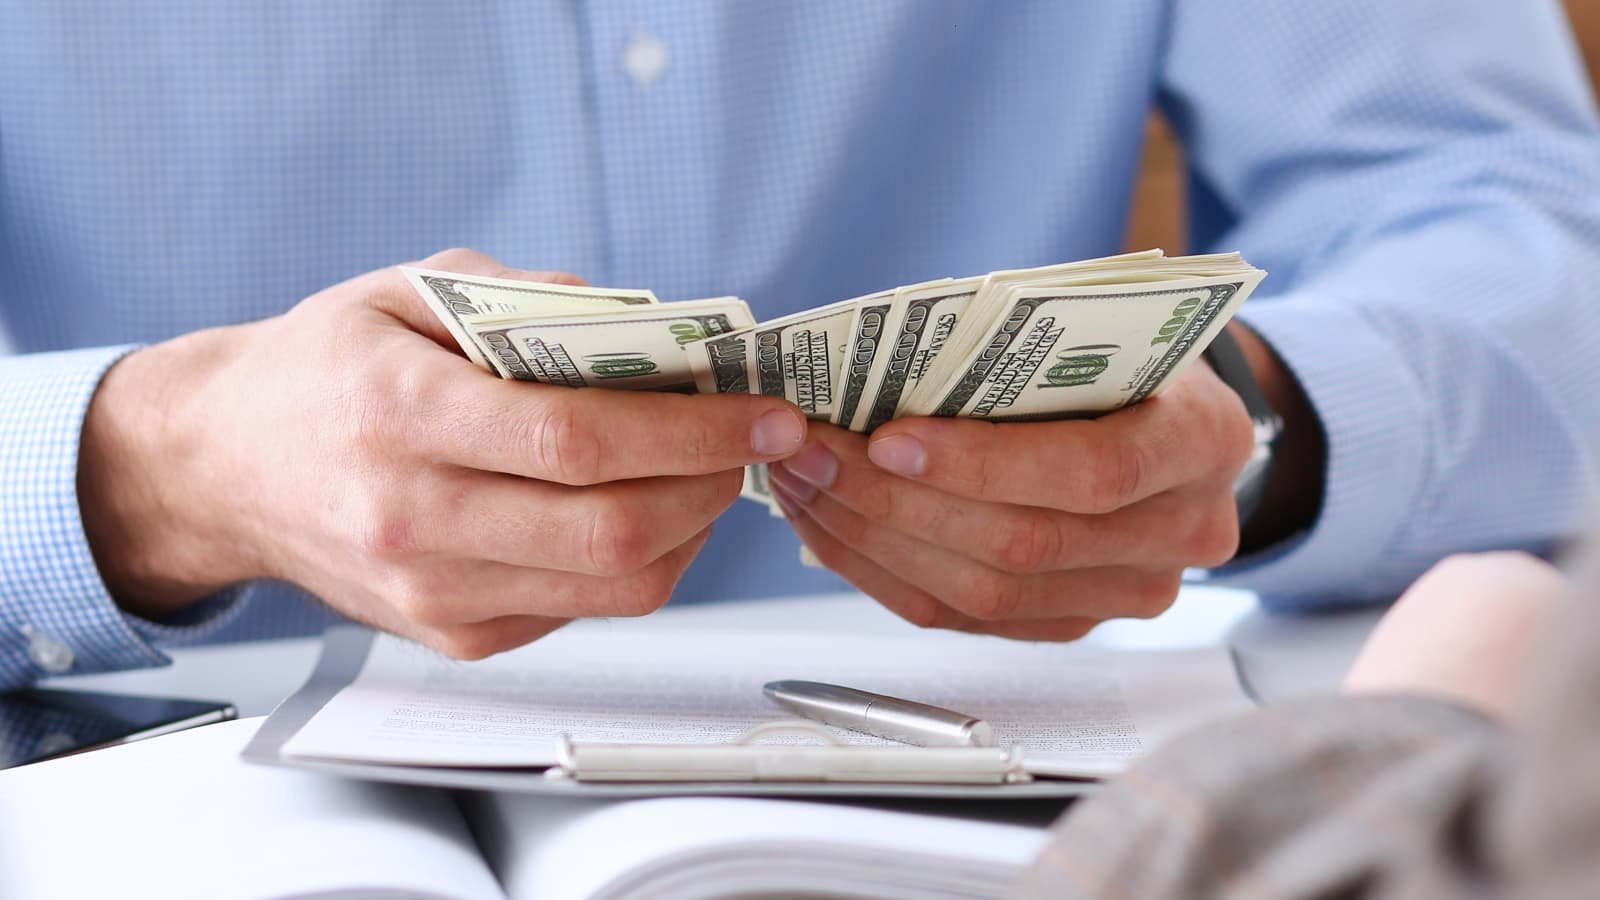 AS LONG AS YOU WORK, YOU CAN DEDUCT BUSINESS EXPENSES DOLLAR FOR DOLLAR